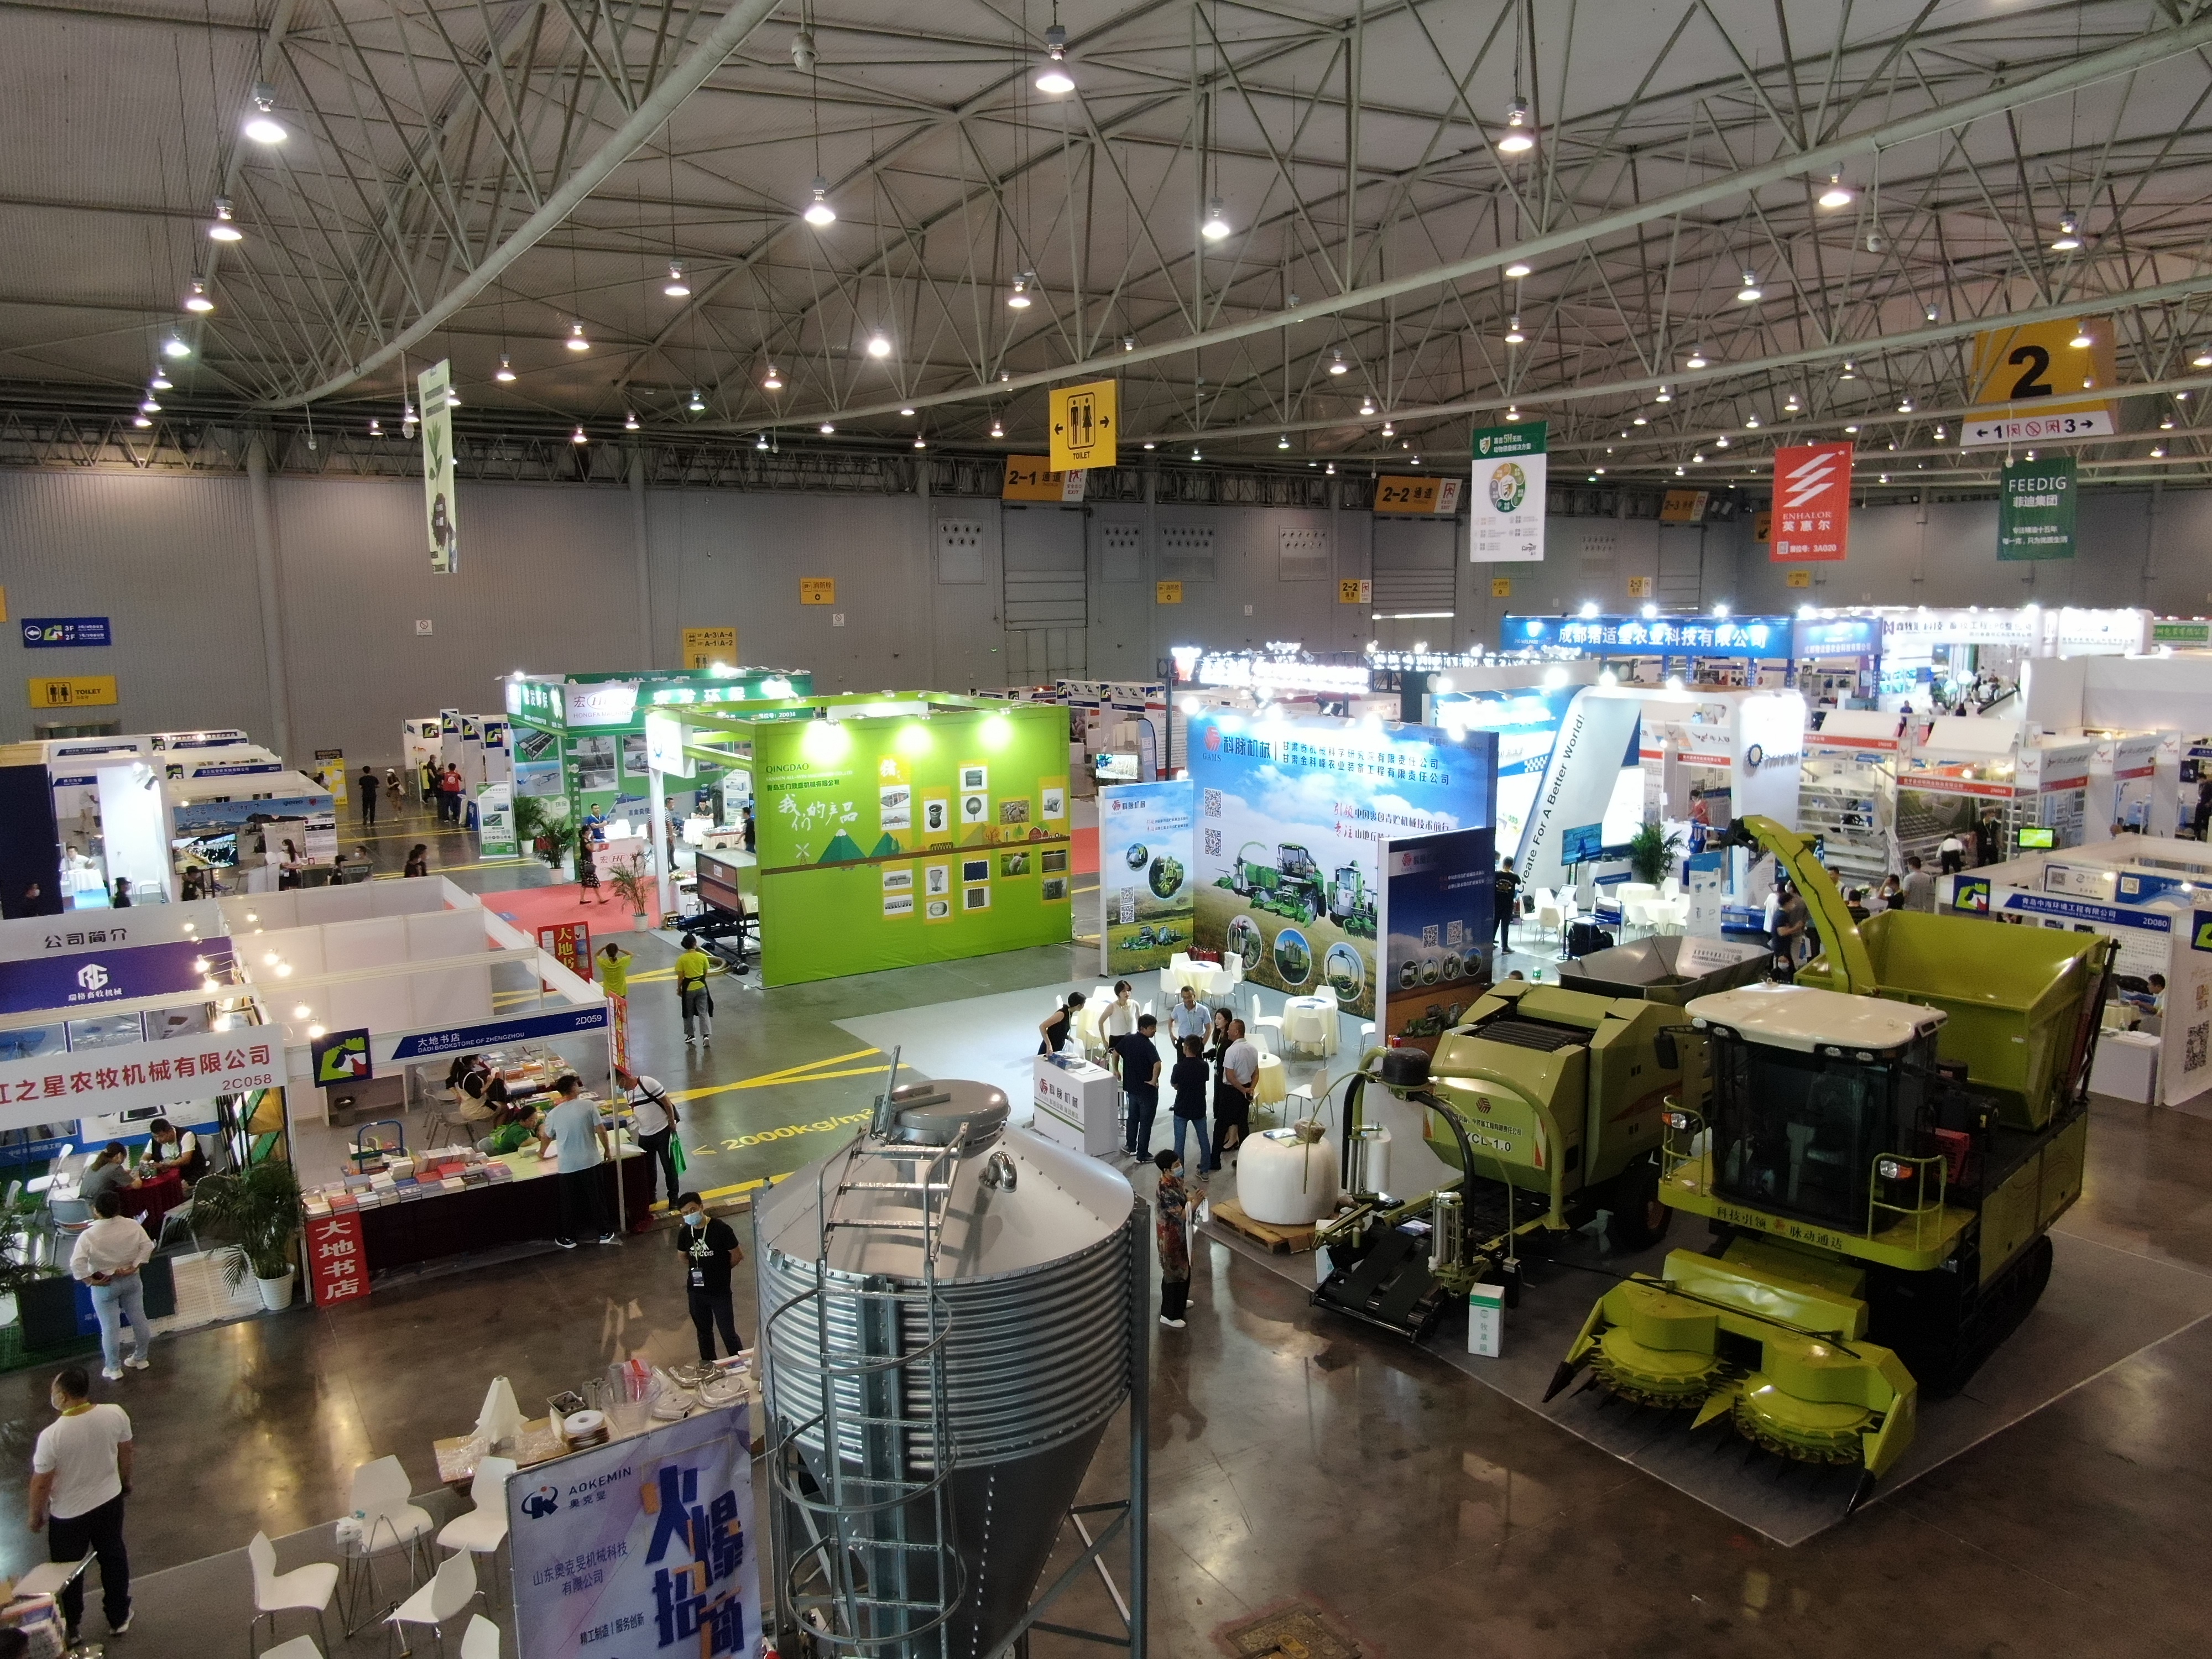 EuroTier China exhibition sends positive signal to livestock and exhibition sectors: fairs with in-person knowledge-sharing also possible in the pandemic